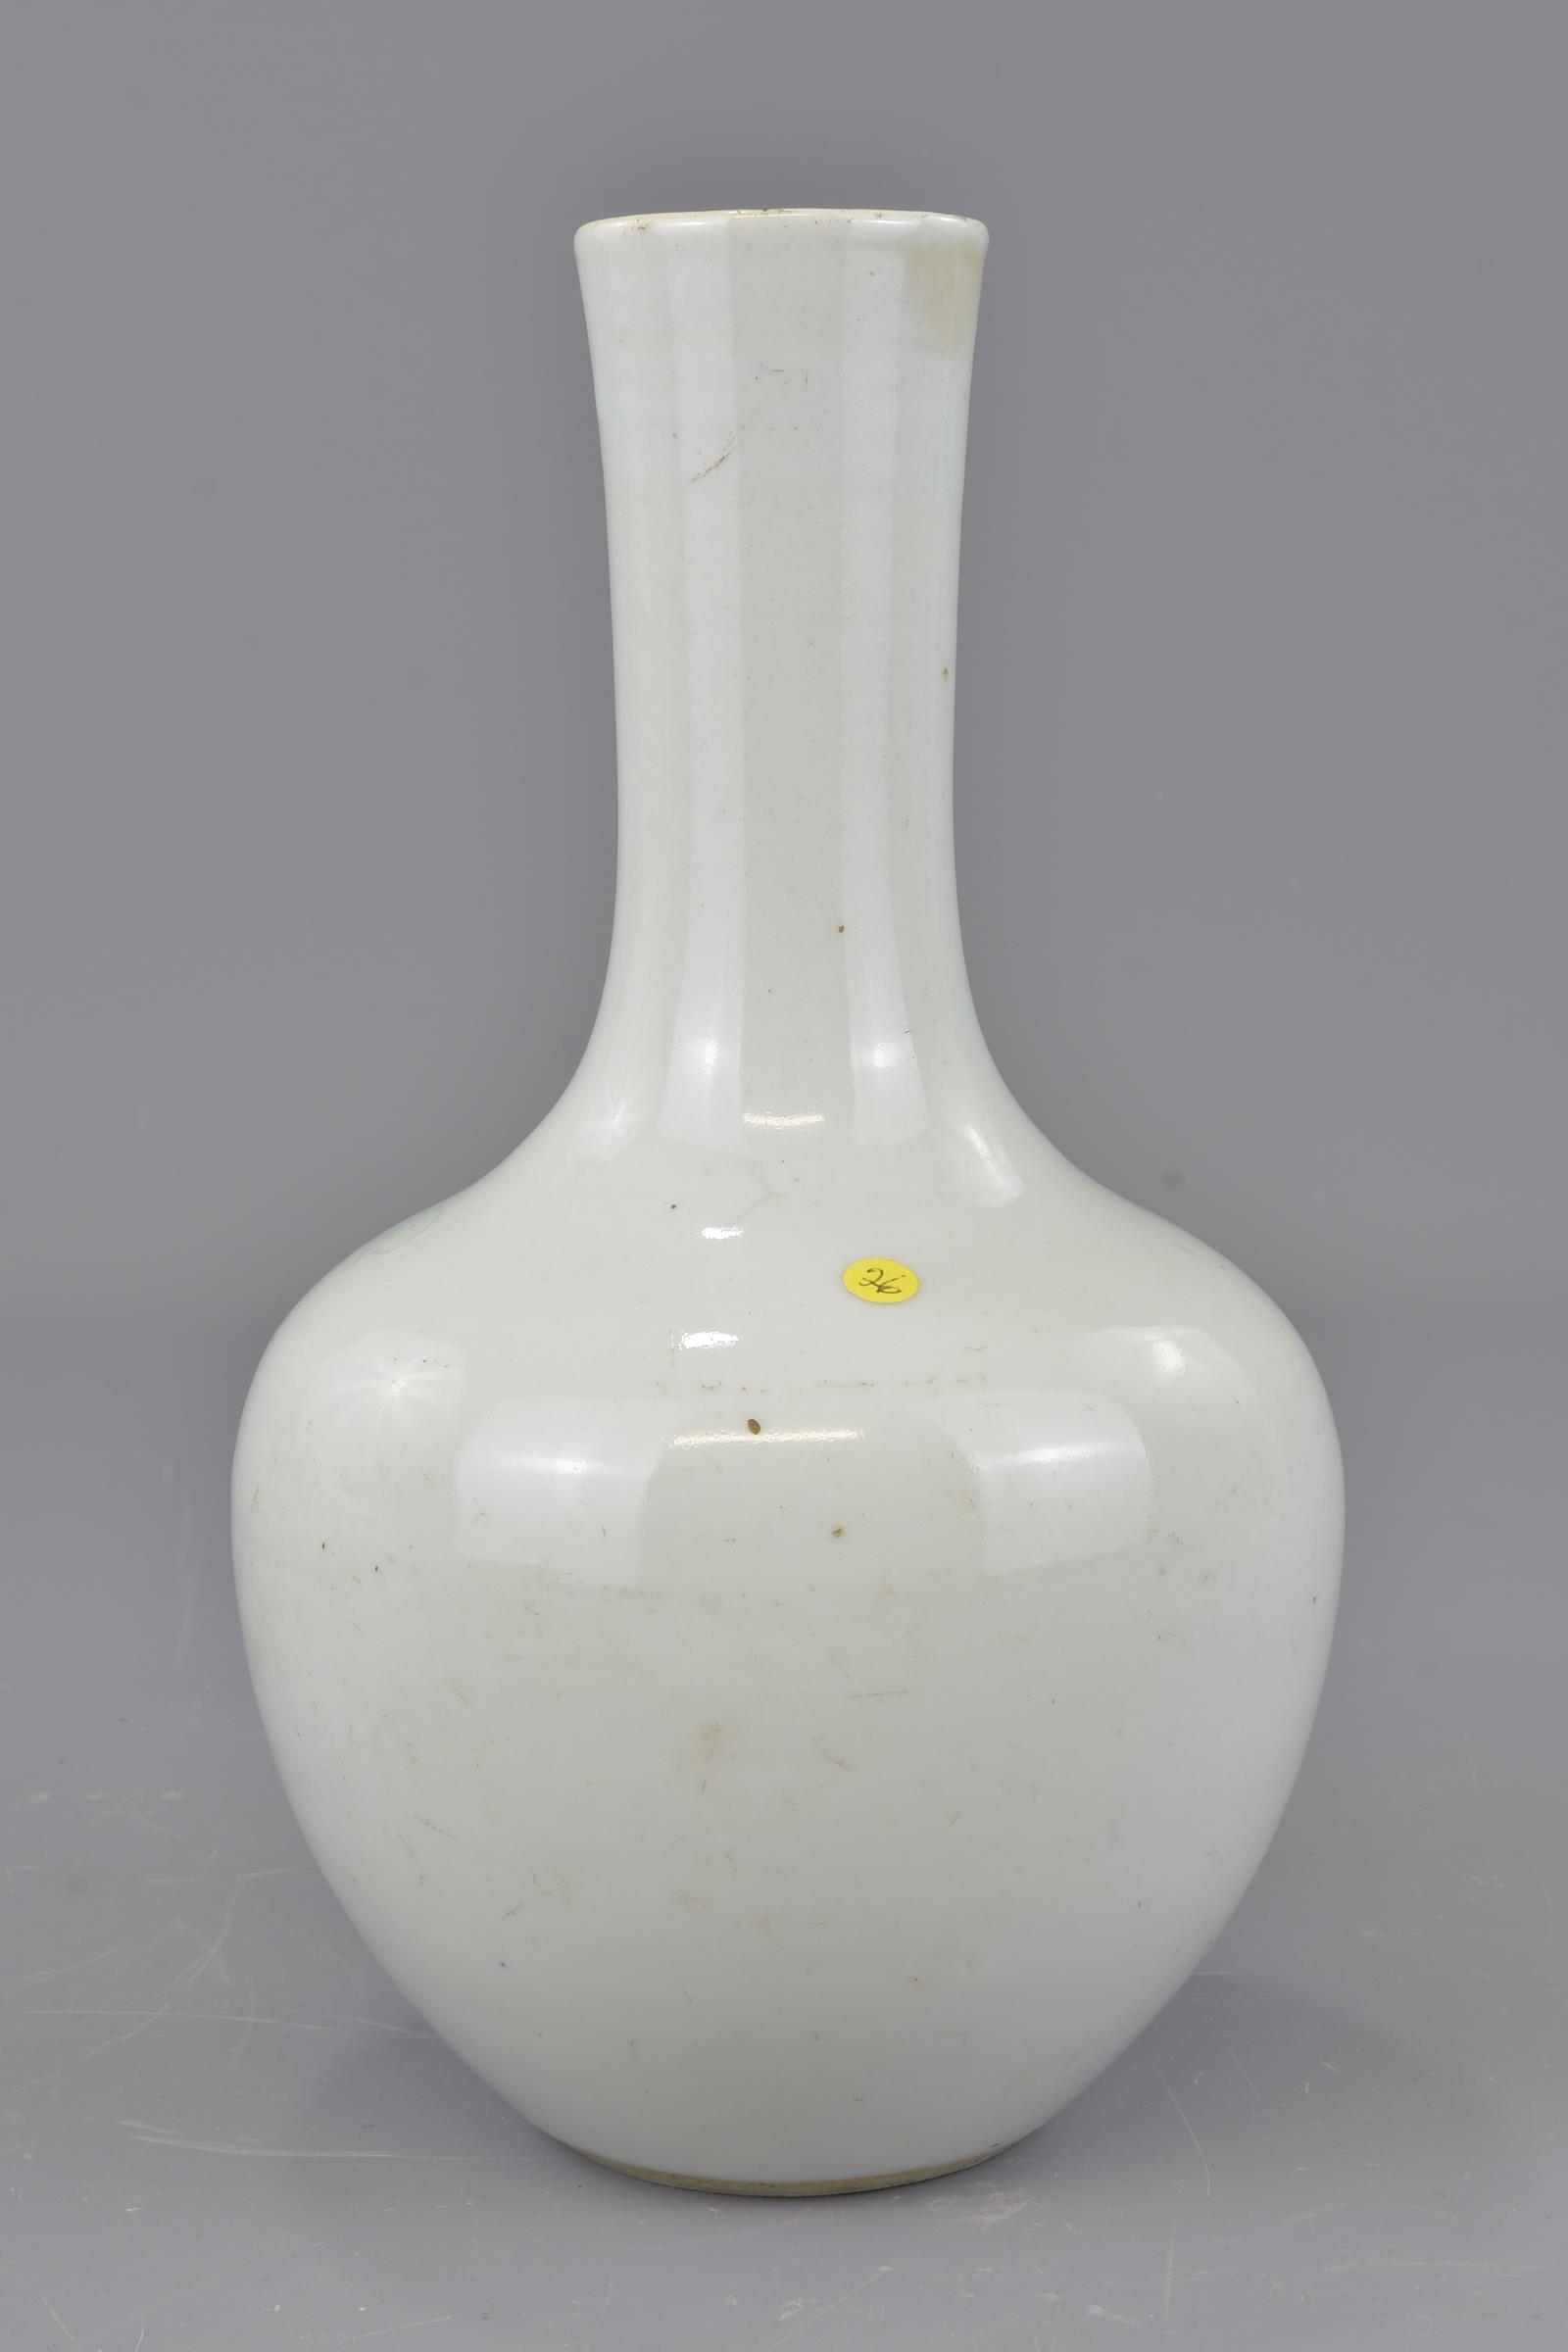 A Chinese 19th century white glazed porcelain bottle vase together with 19th century bowl. 23cm tall - Image 3 of 9